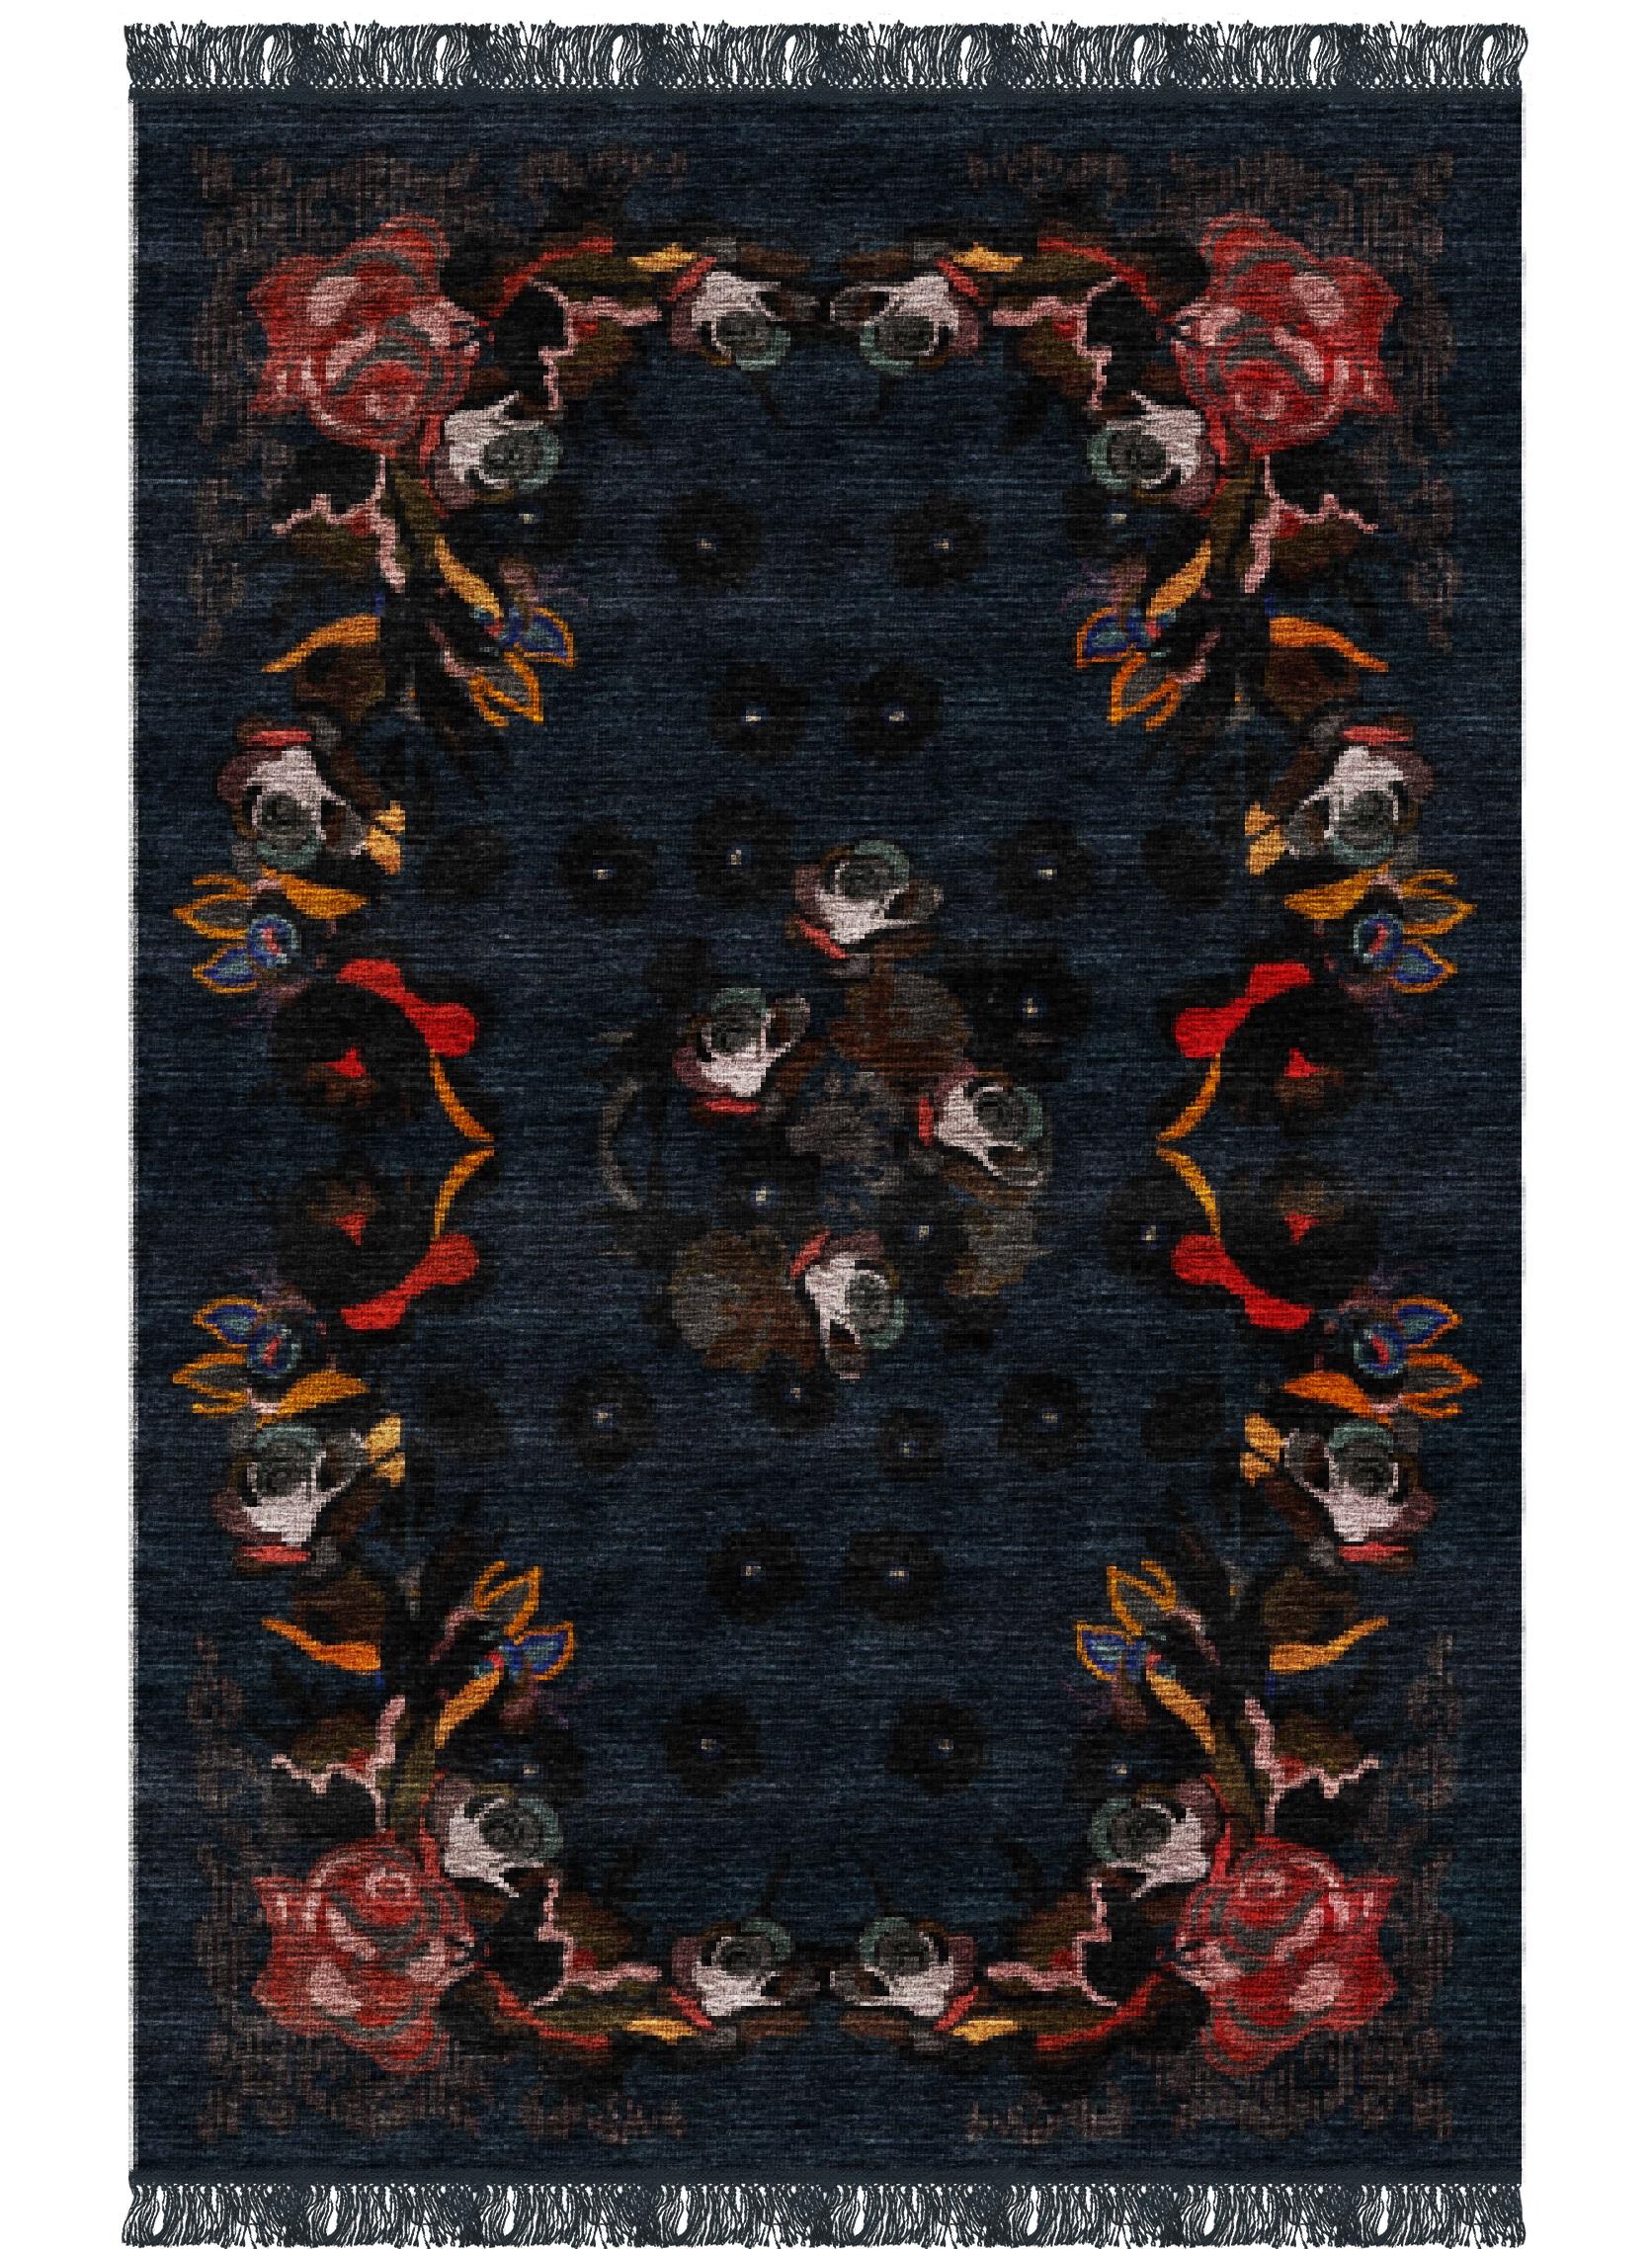 Fiori rug II by Giulio Brambilla
Dimensions: D 300 x W 200 x H 0.5 cm
Materials: NZ wool, melange yarn

A captivating composition inspired by Georgian art, this exquisite rug is a contemporary design by artist and architect Giulio Brambilla.